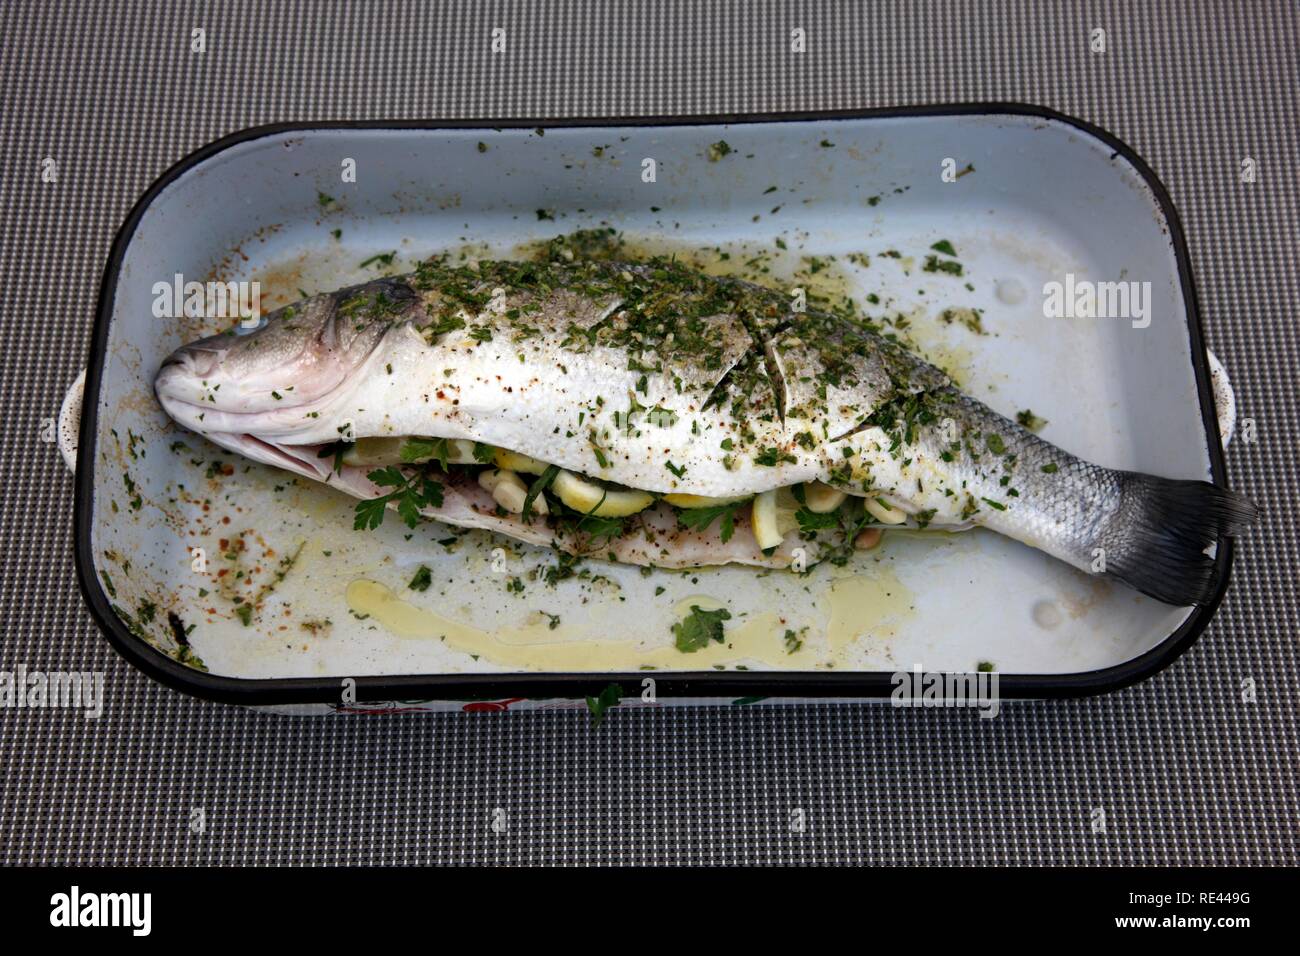 Fish, sea bass, stuffed with herbs and lemon, for grilling Stock Photo